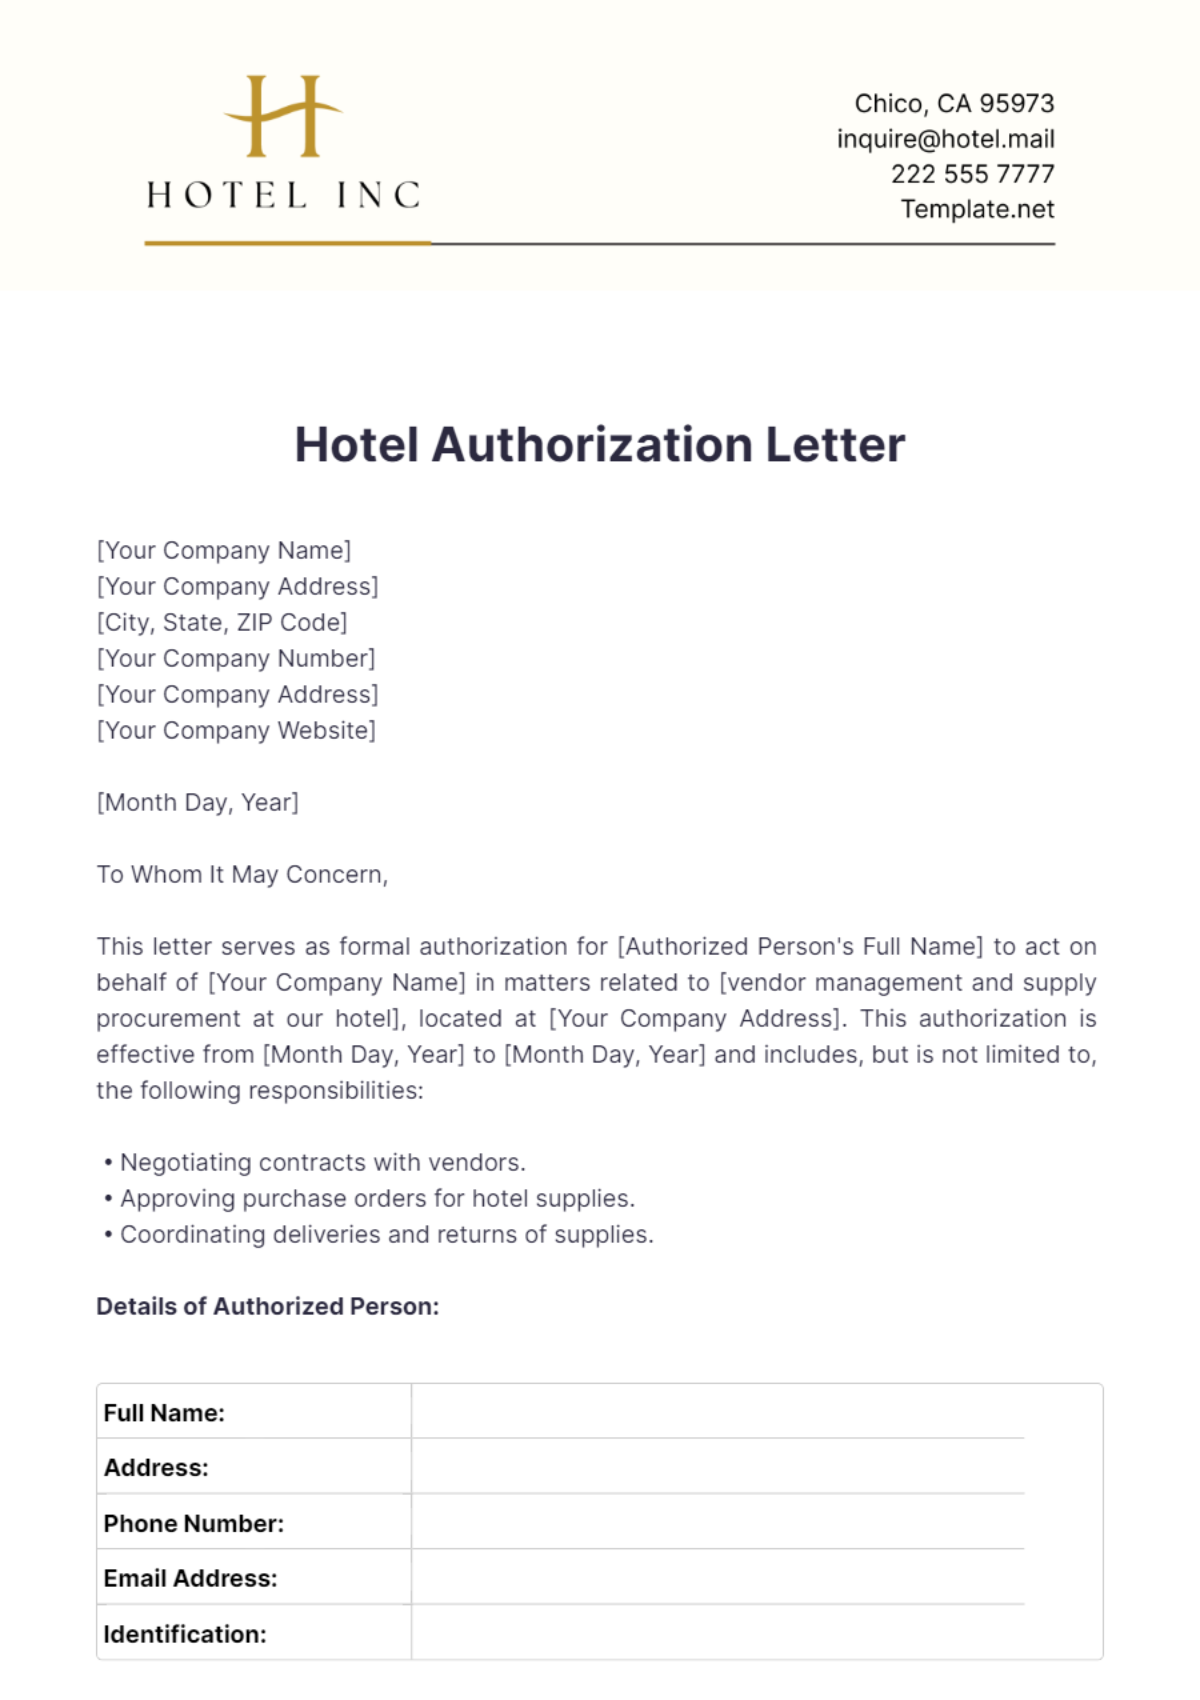 Hotel Authorization Letter Template